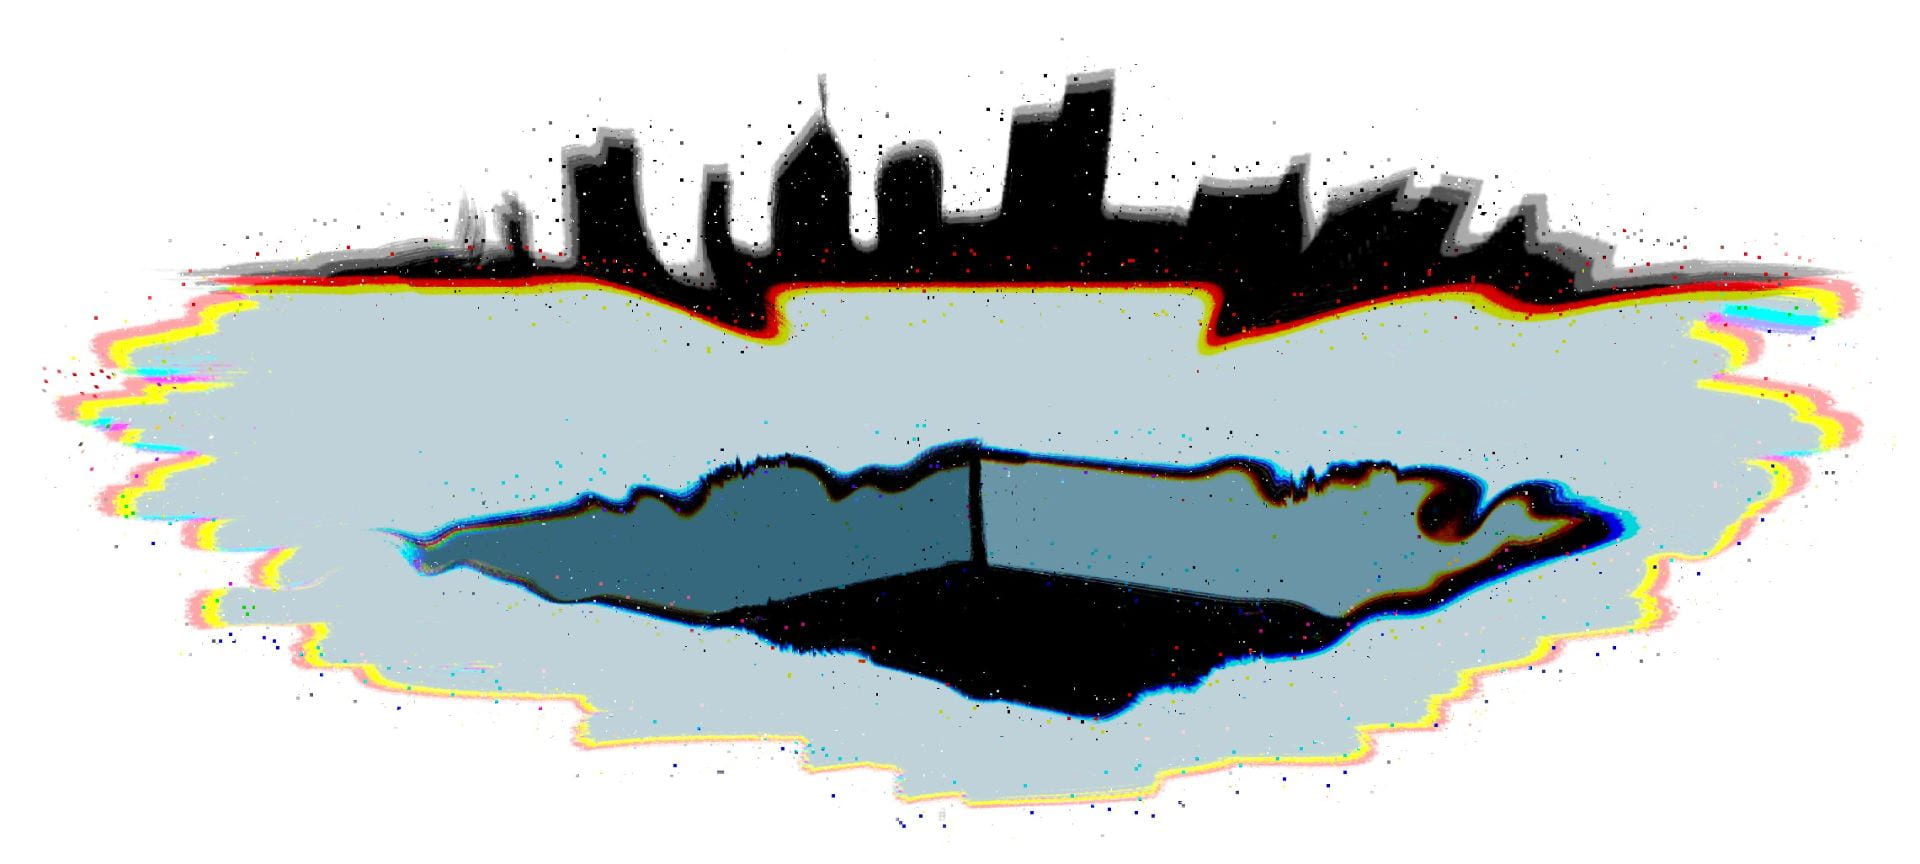 Digital art. A city atop a hole in the blue ground. Colors are speckled around the image